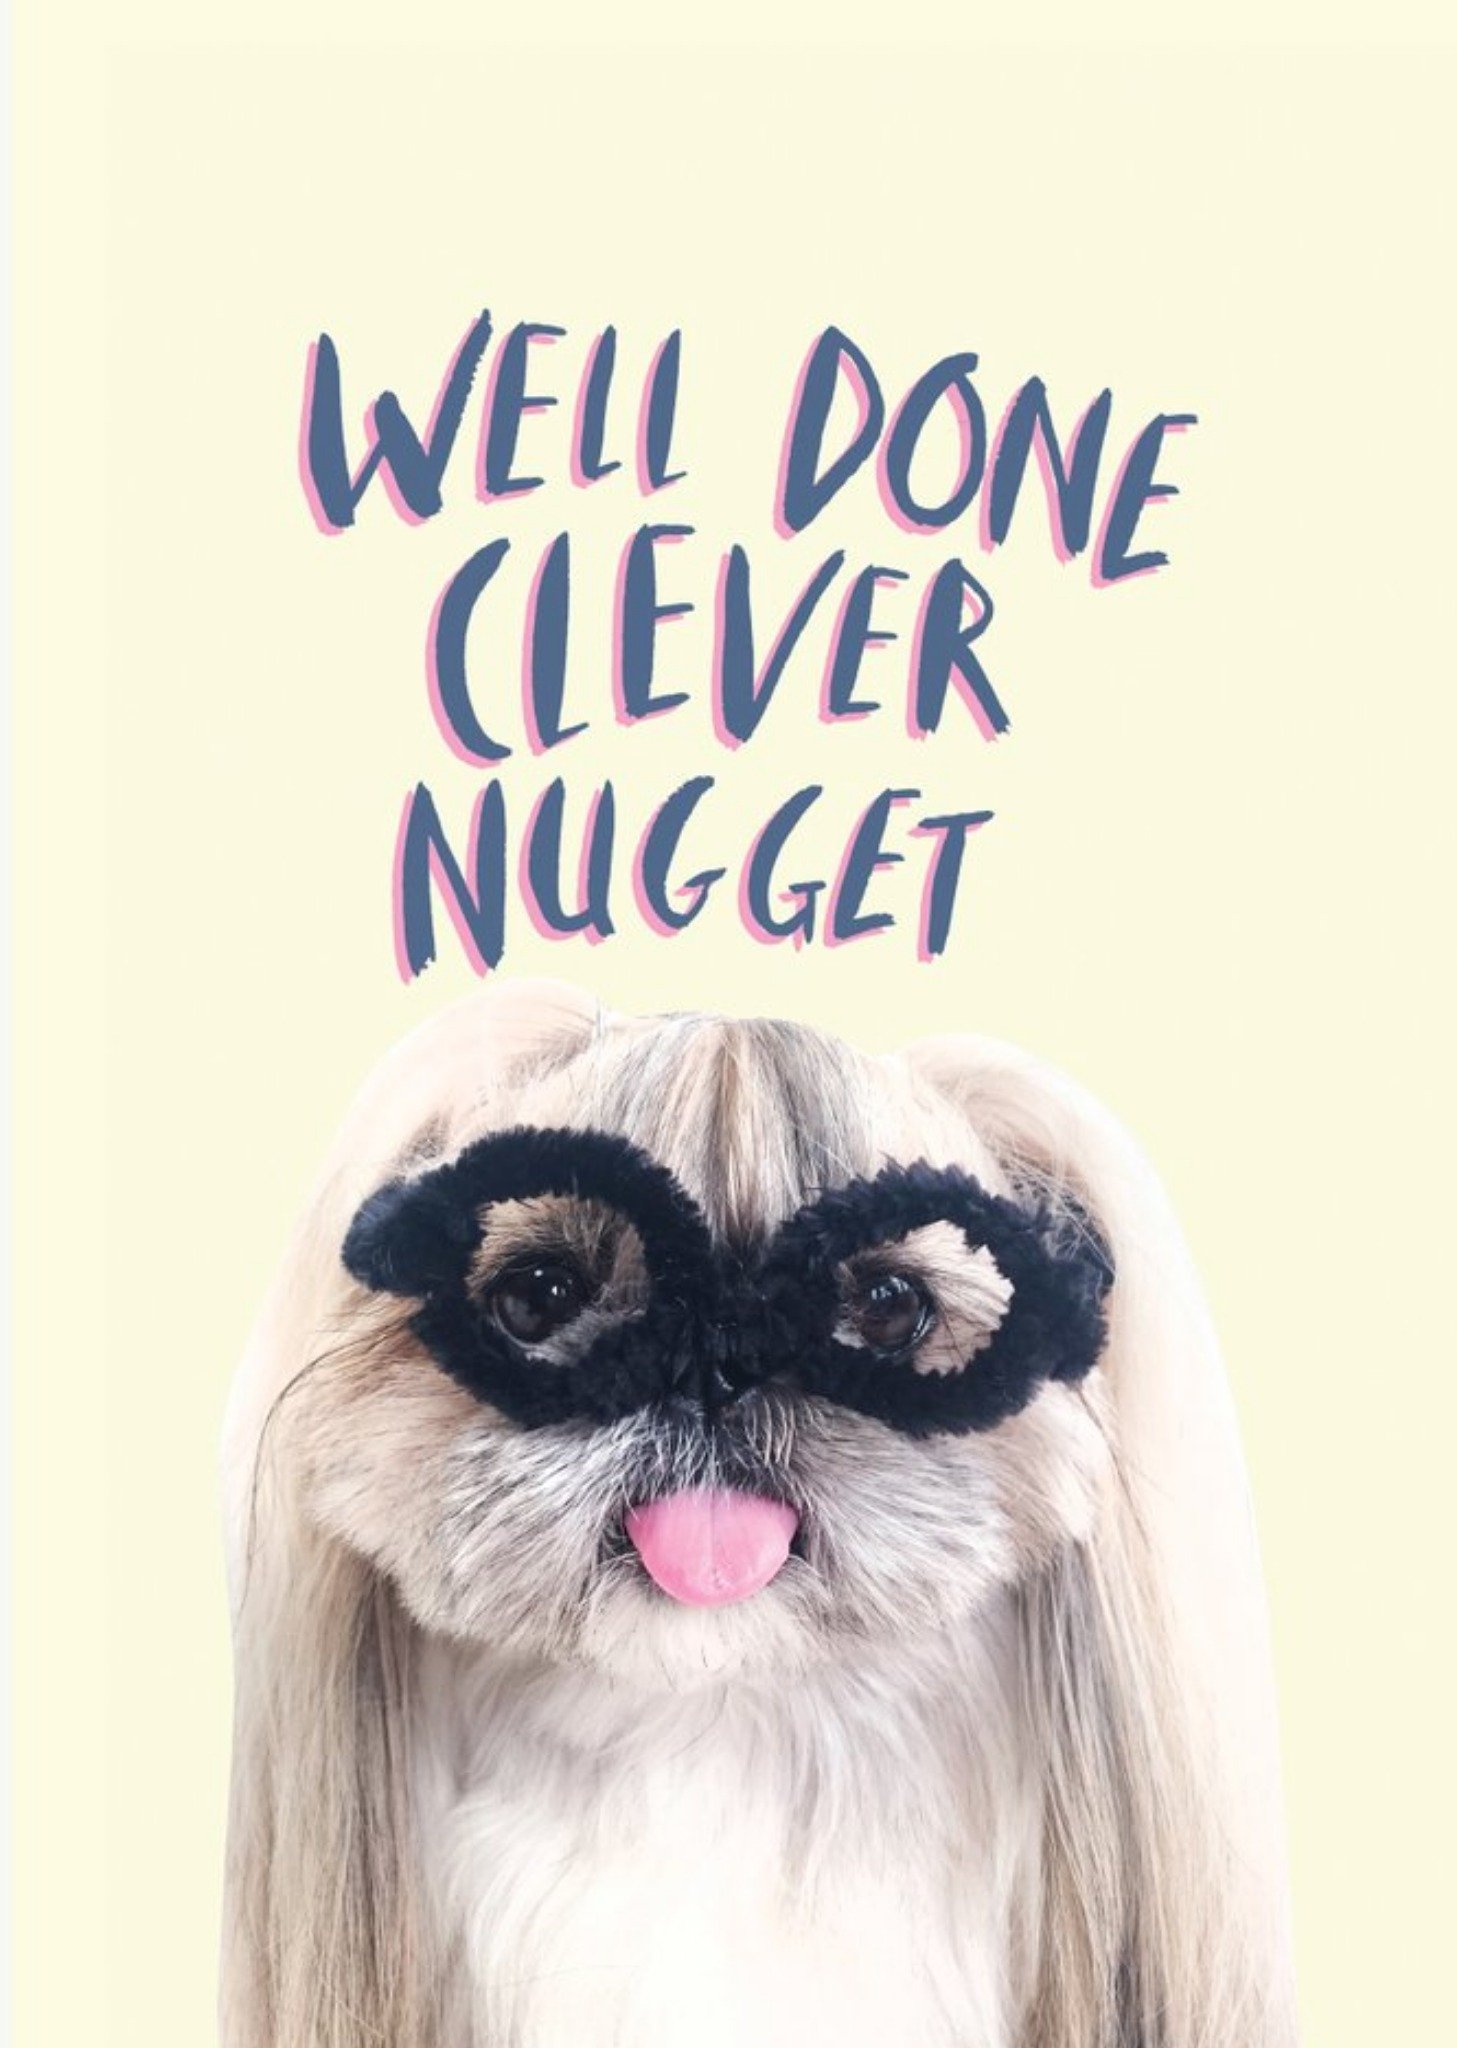 Jolly Awesome Well Done Clever Nugget Card Ecard